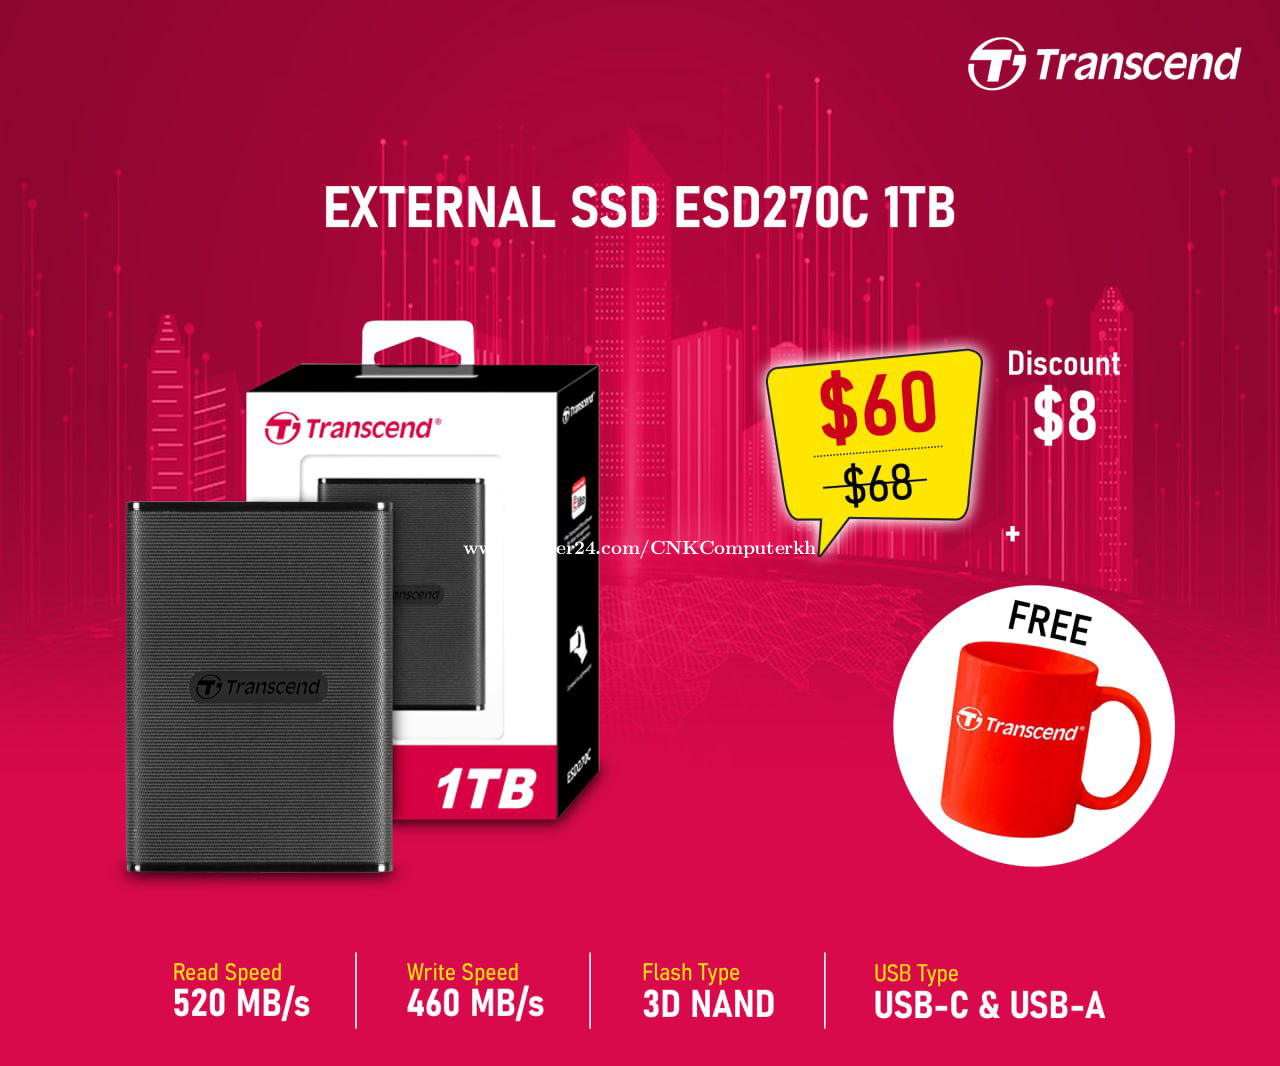 Ssd External Tb Esd C Ts Tesd C Free Red Cup Price In Mittakpheap Cambodia